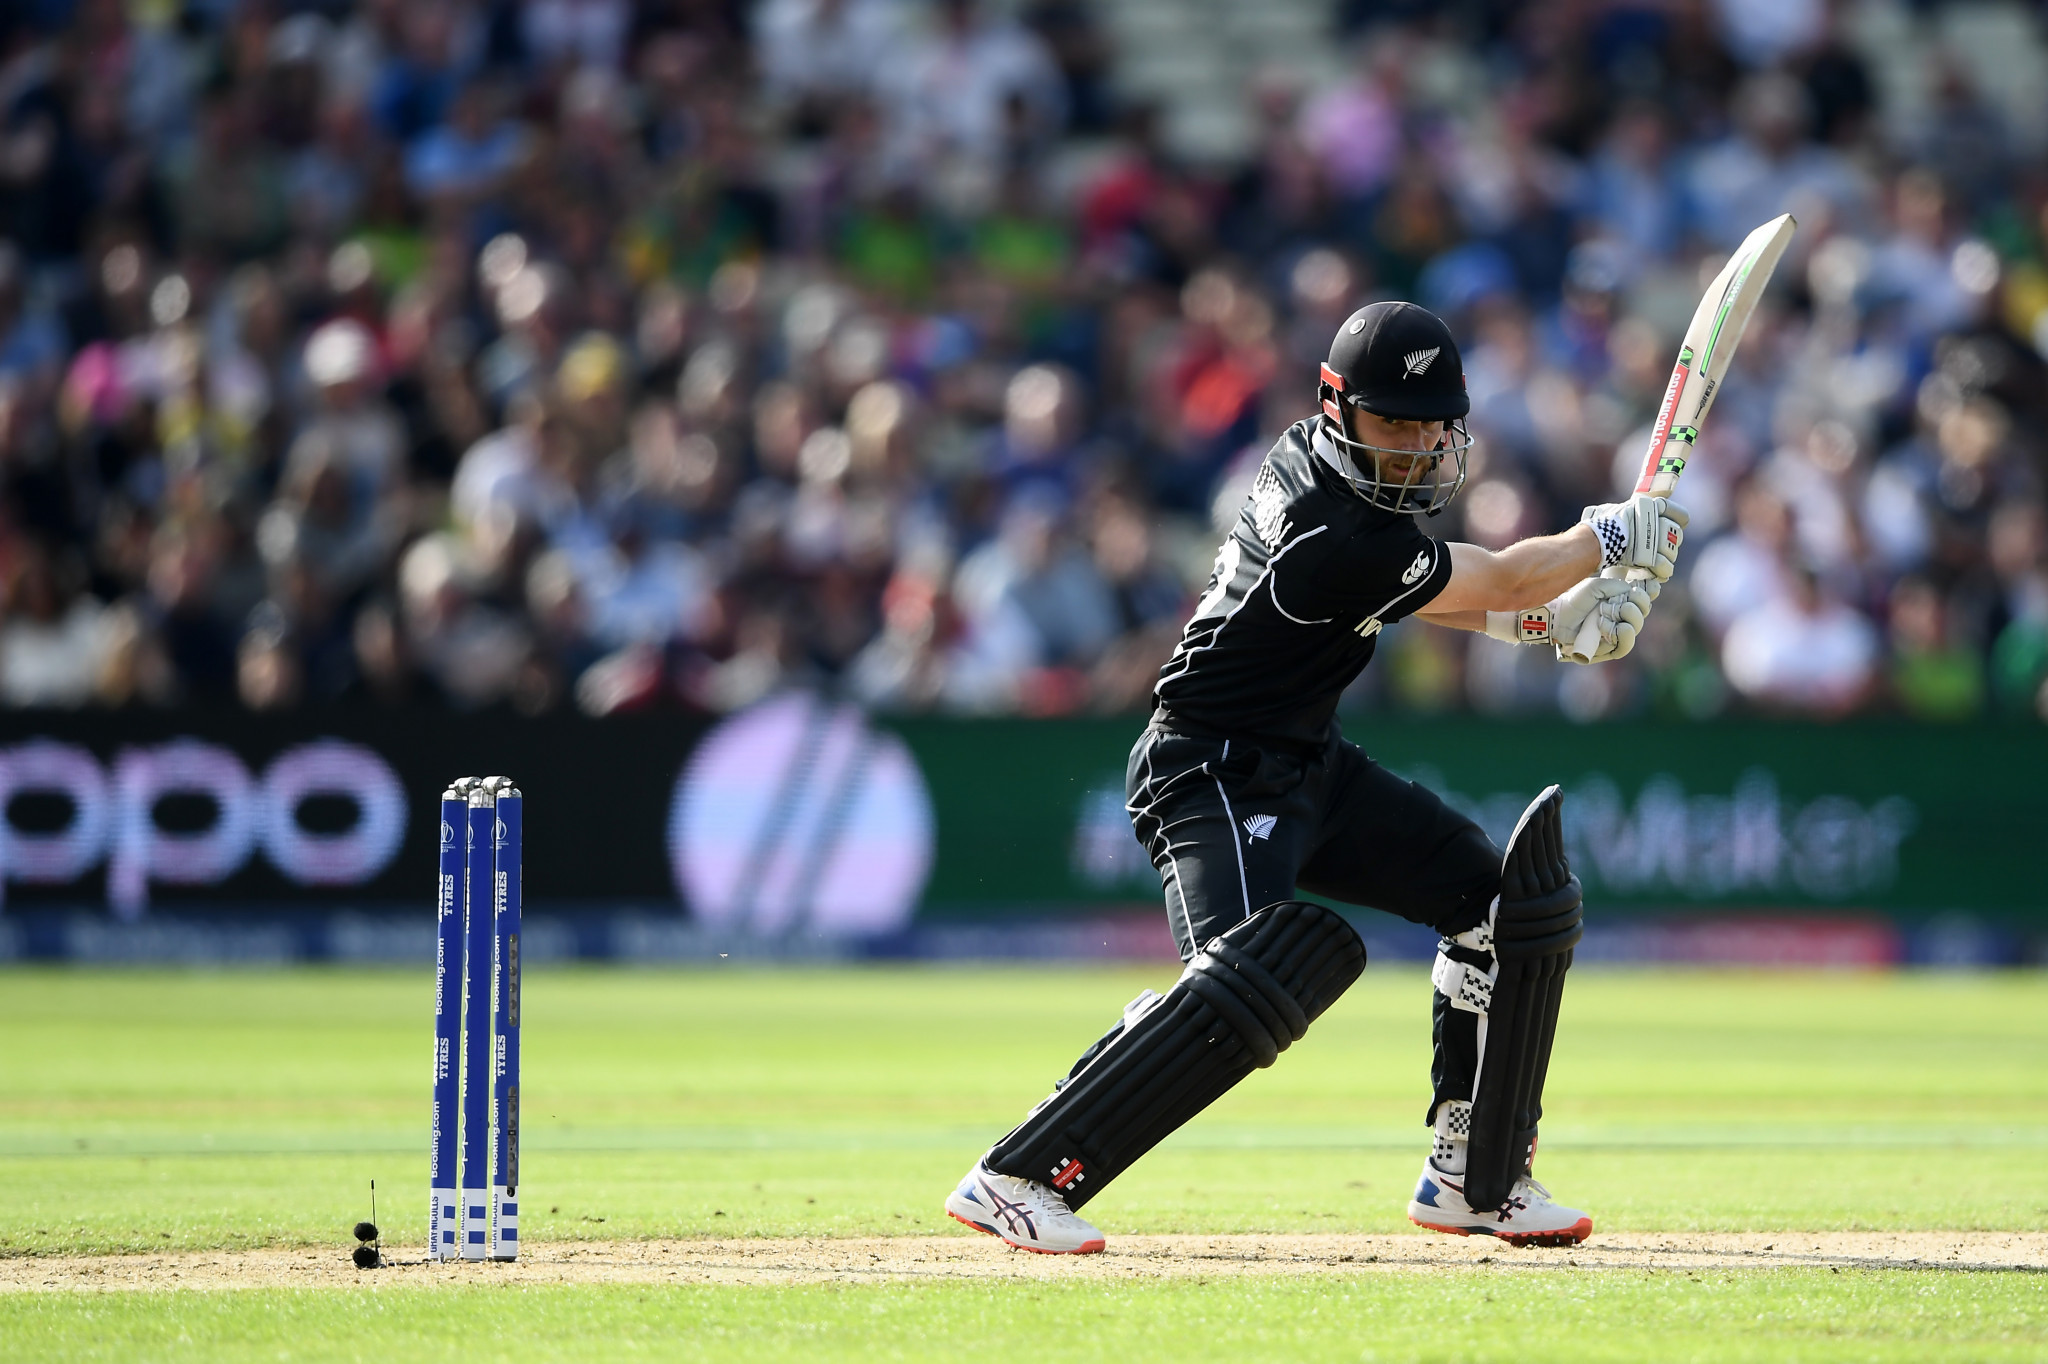 Williamson's superb century sees New Zealand beat South Africa at Cricket World Cup